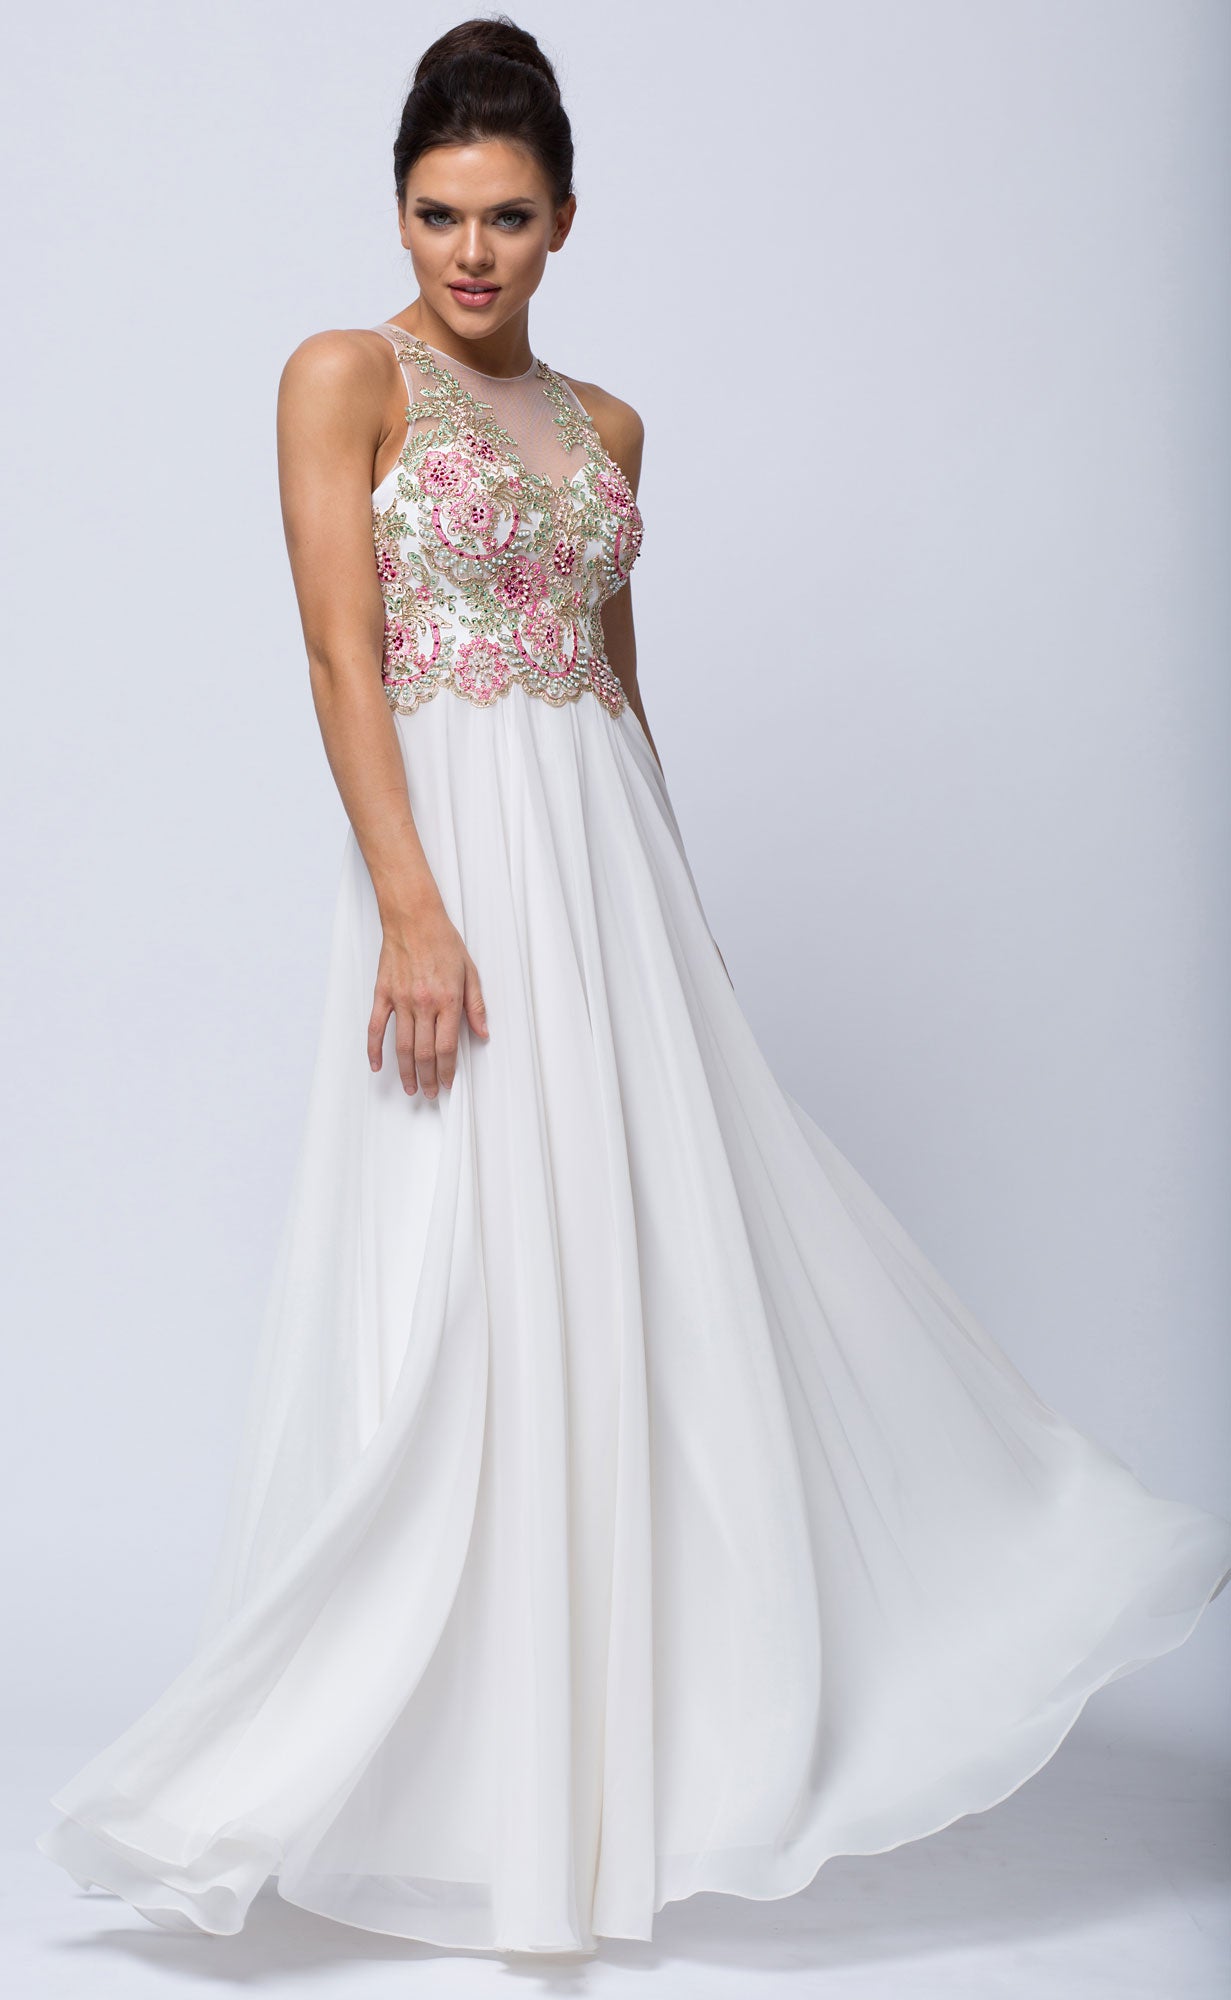 Image of Sleeveless Floral Accent Beaded Top Long Prom Dress in Ivory/Pink